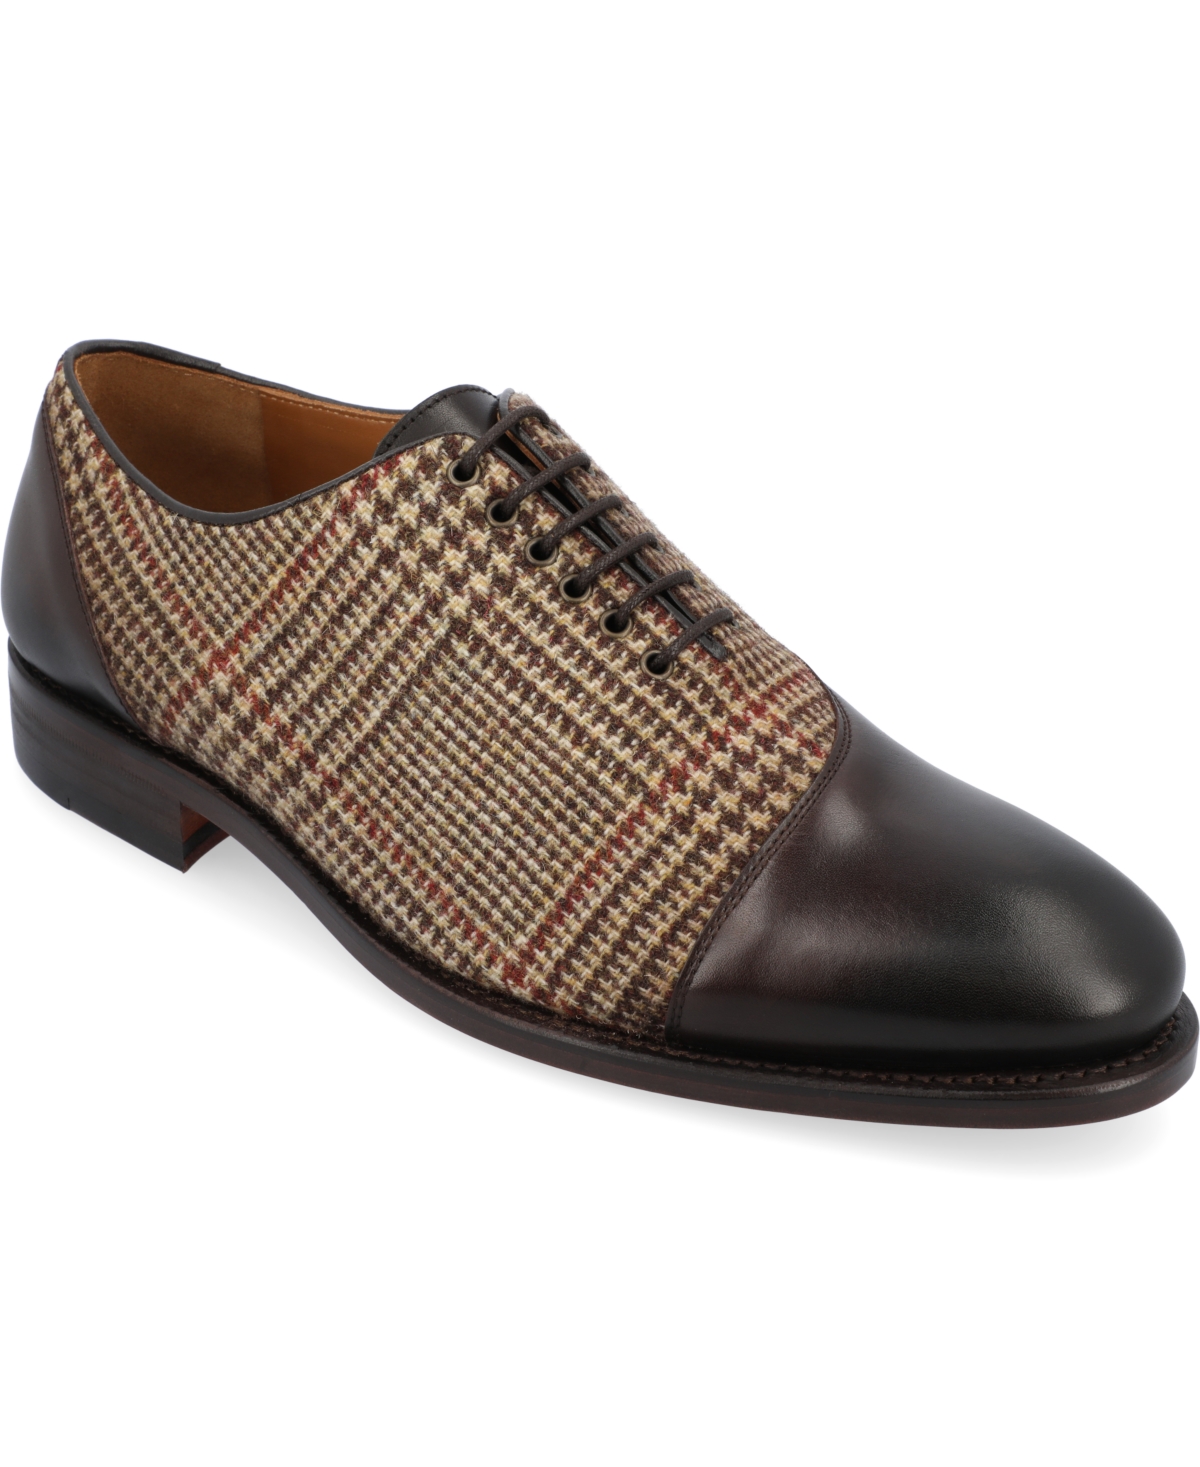 Mens Vintage Shoes, Boots | Retro Shoes & Boots Taft Mens Paris Handcrafted Leather and Wool Asymmetrical Oxford Lace-up Dress Shoes - Plaid $325.00 AT vintagedancer.com